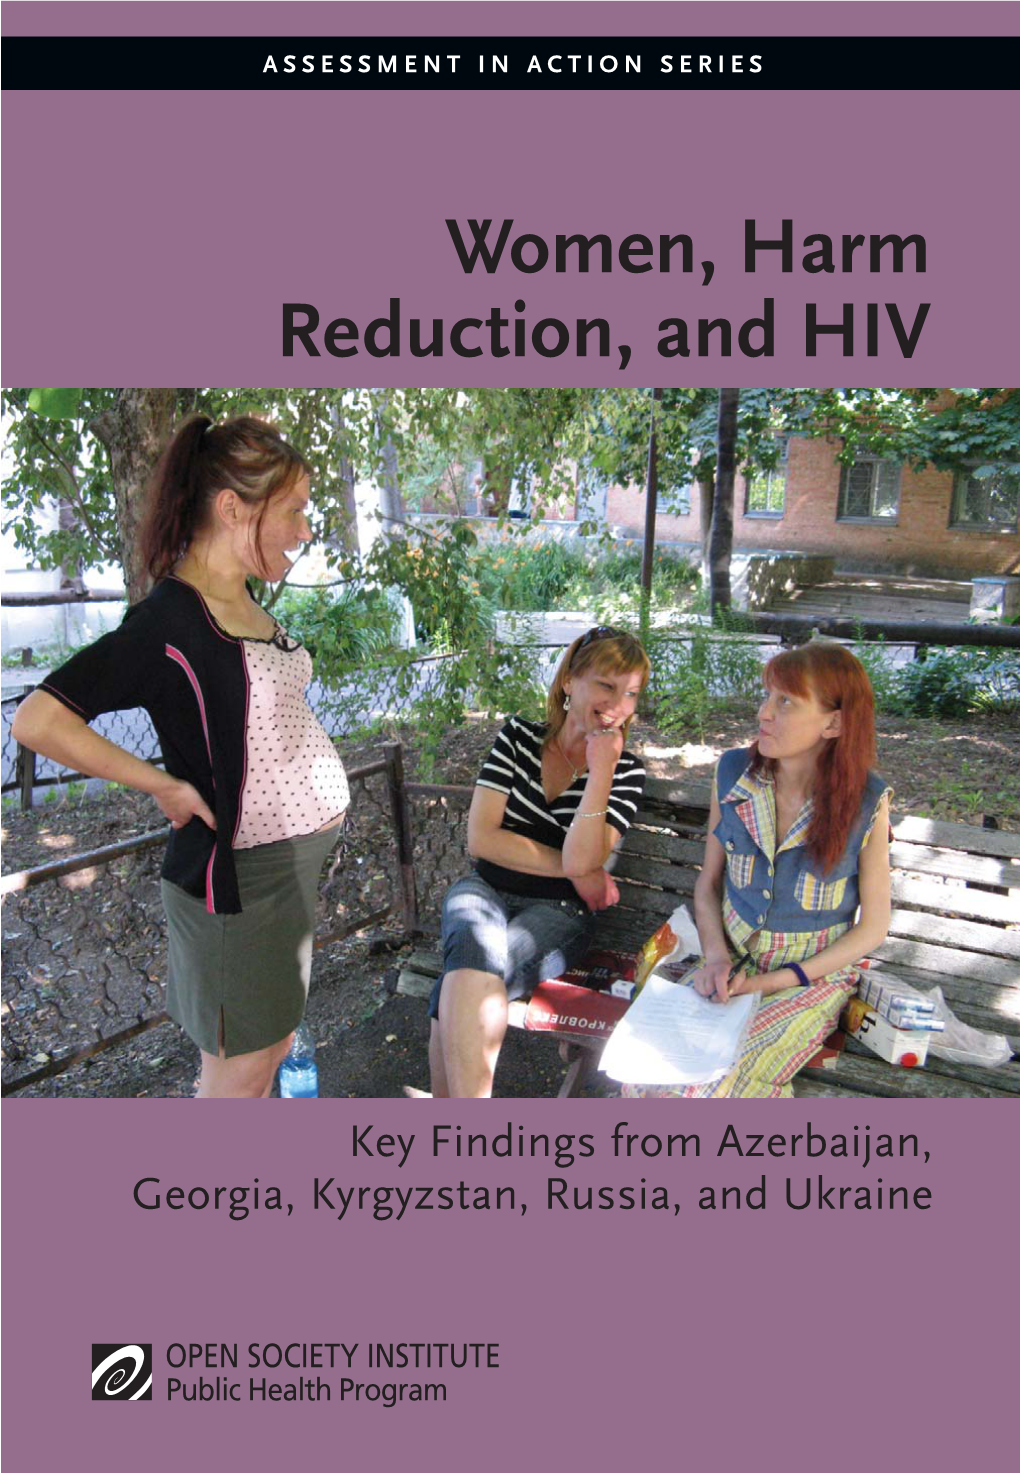 Women, Harm Reduction, and HIV